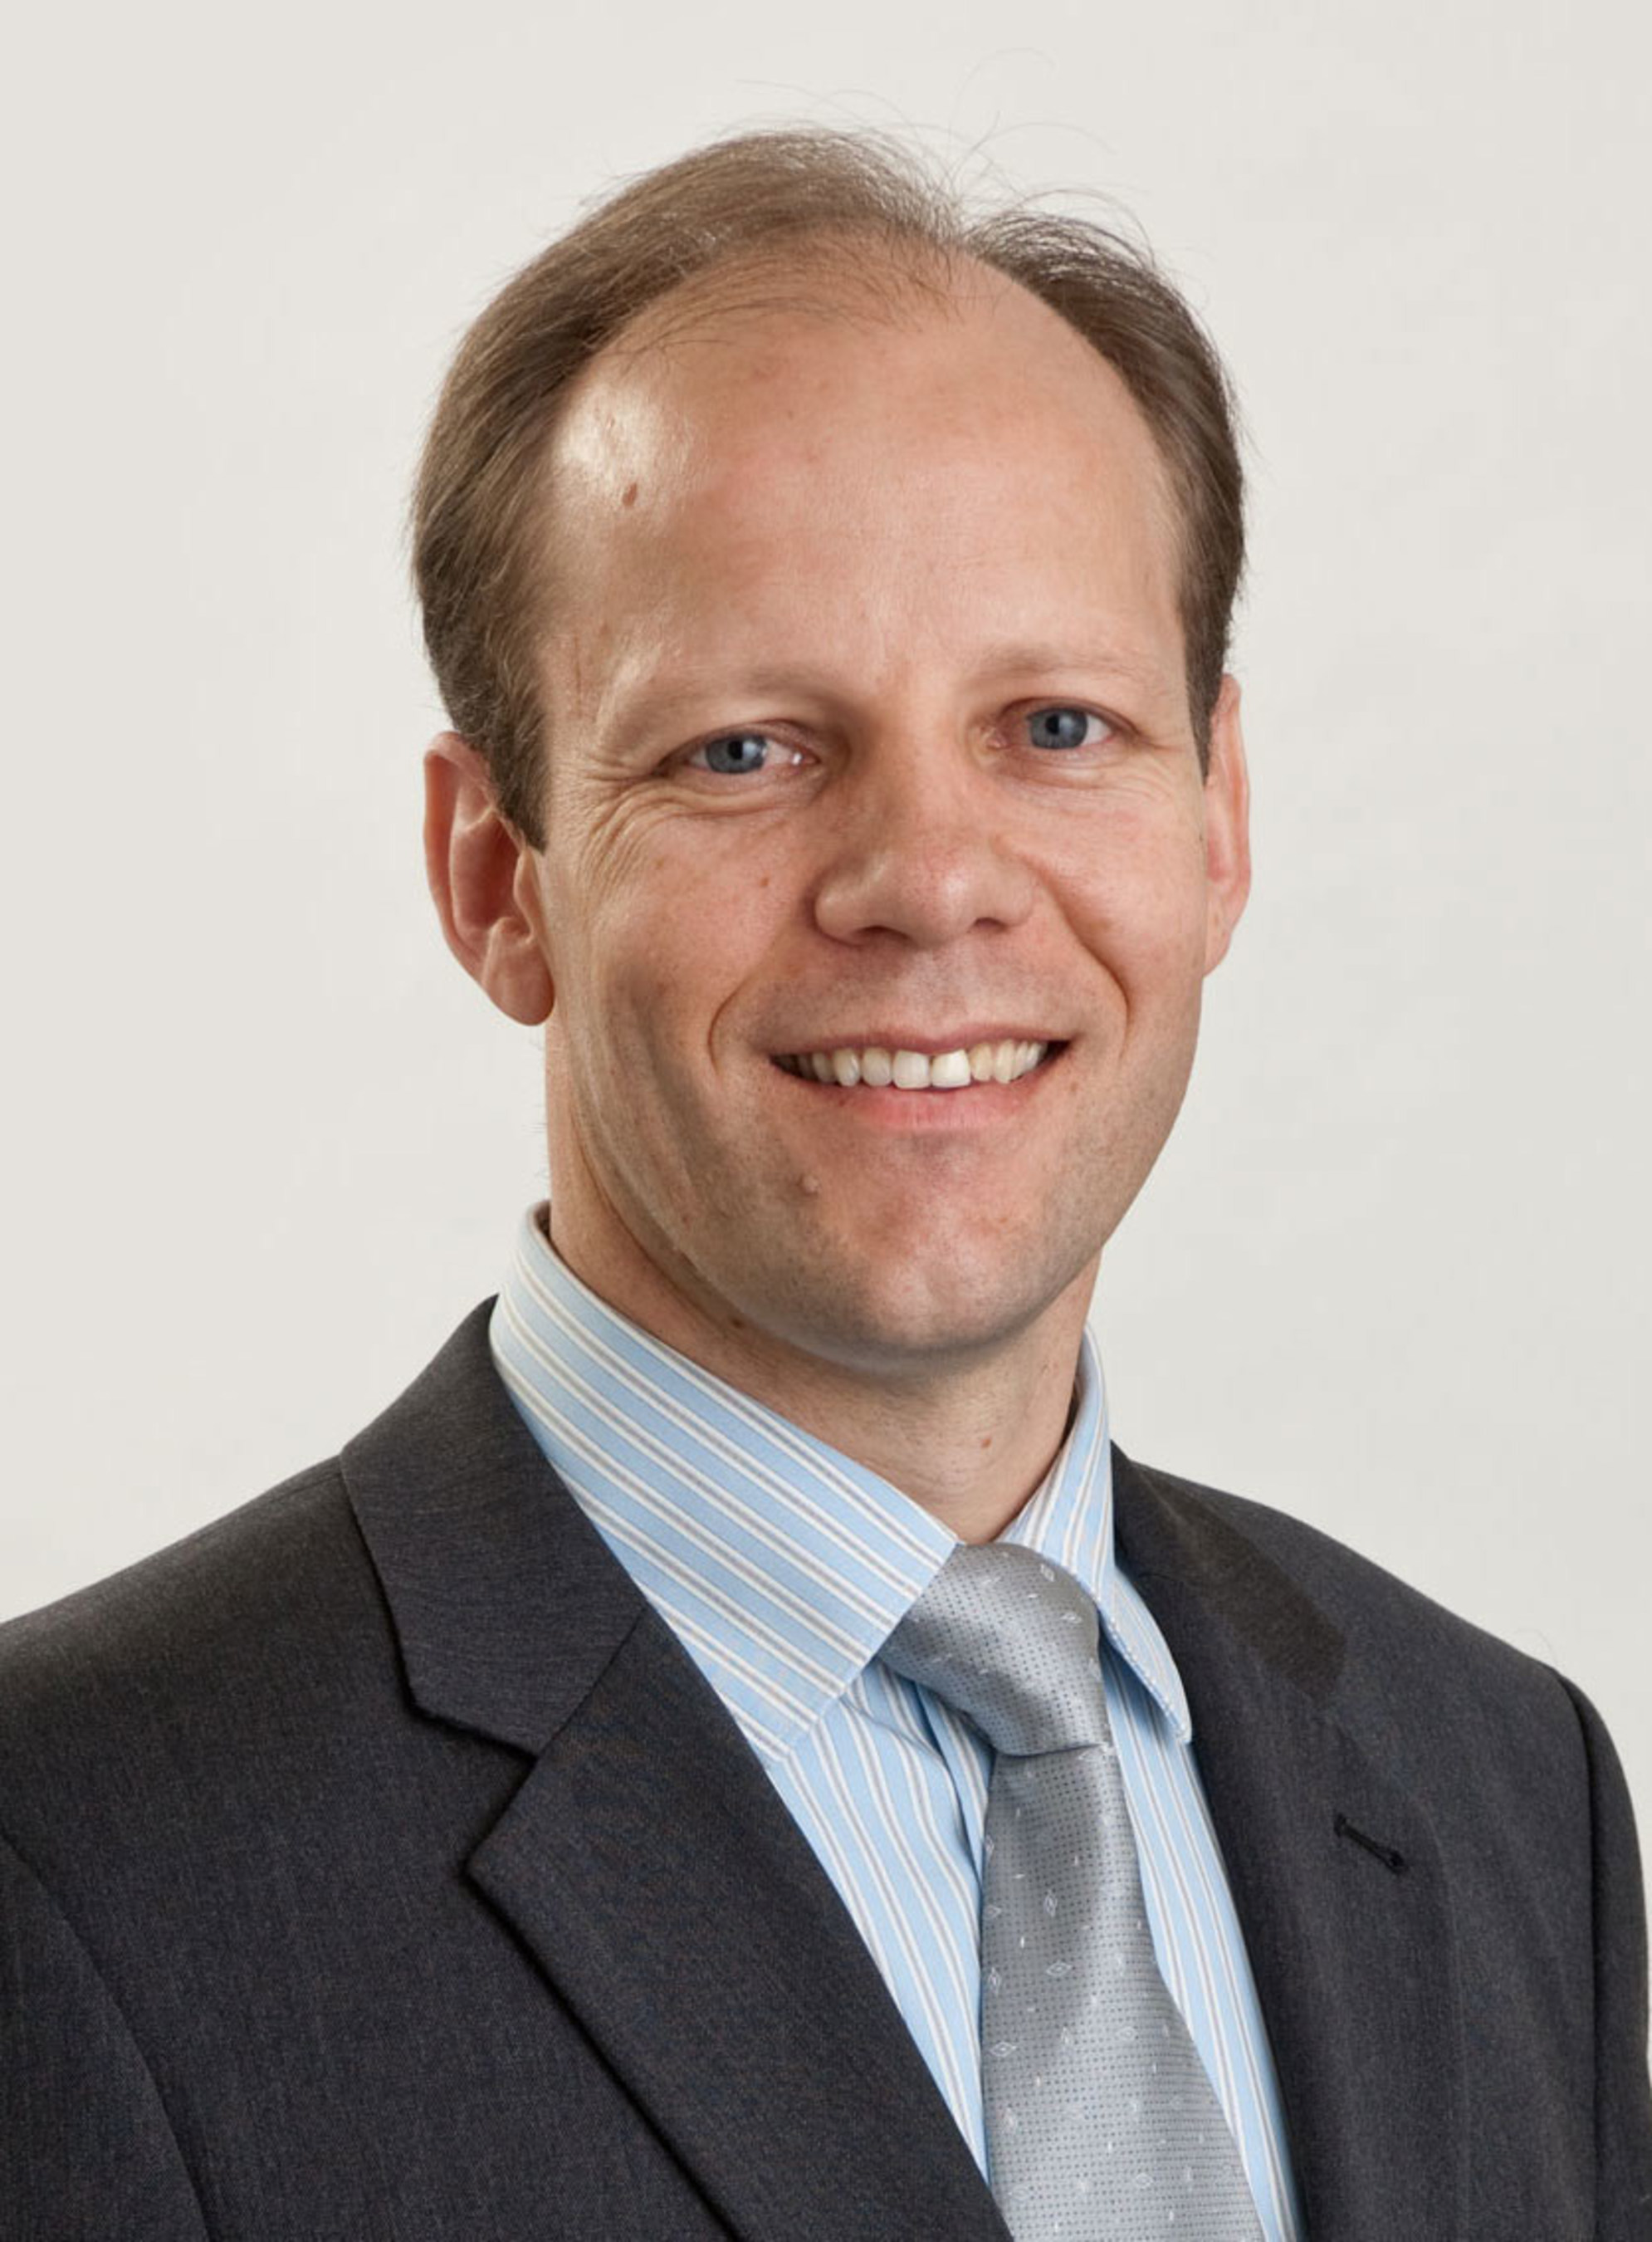 Johan Swart has been named Chief Information Officer of Mercedes-Benz Financial Services.